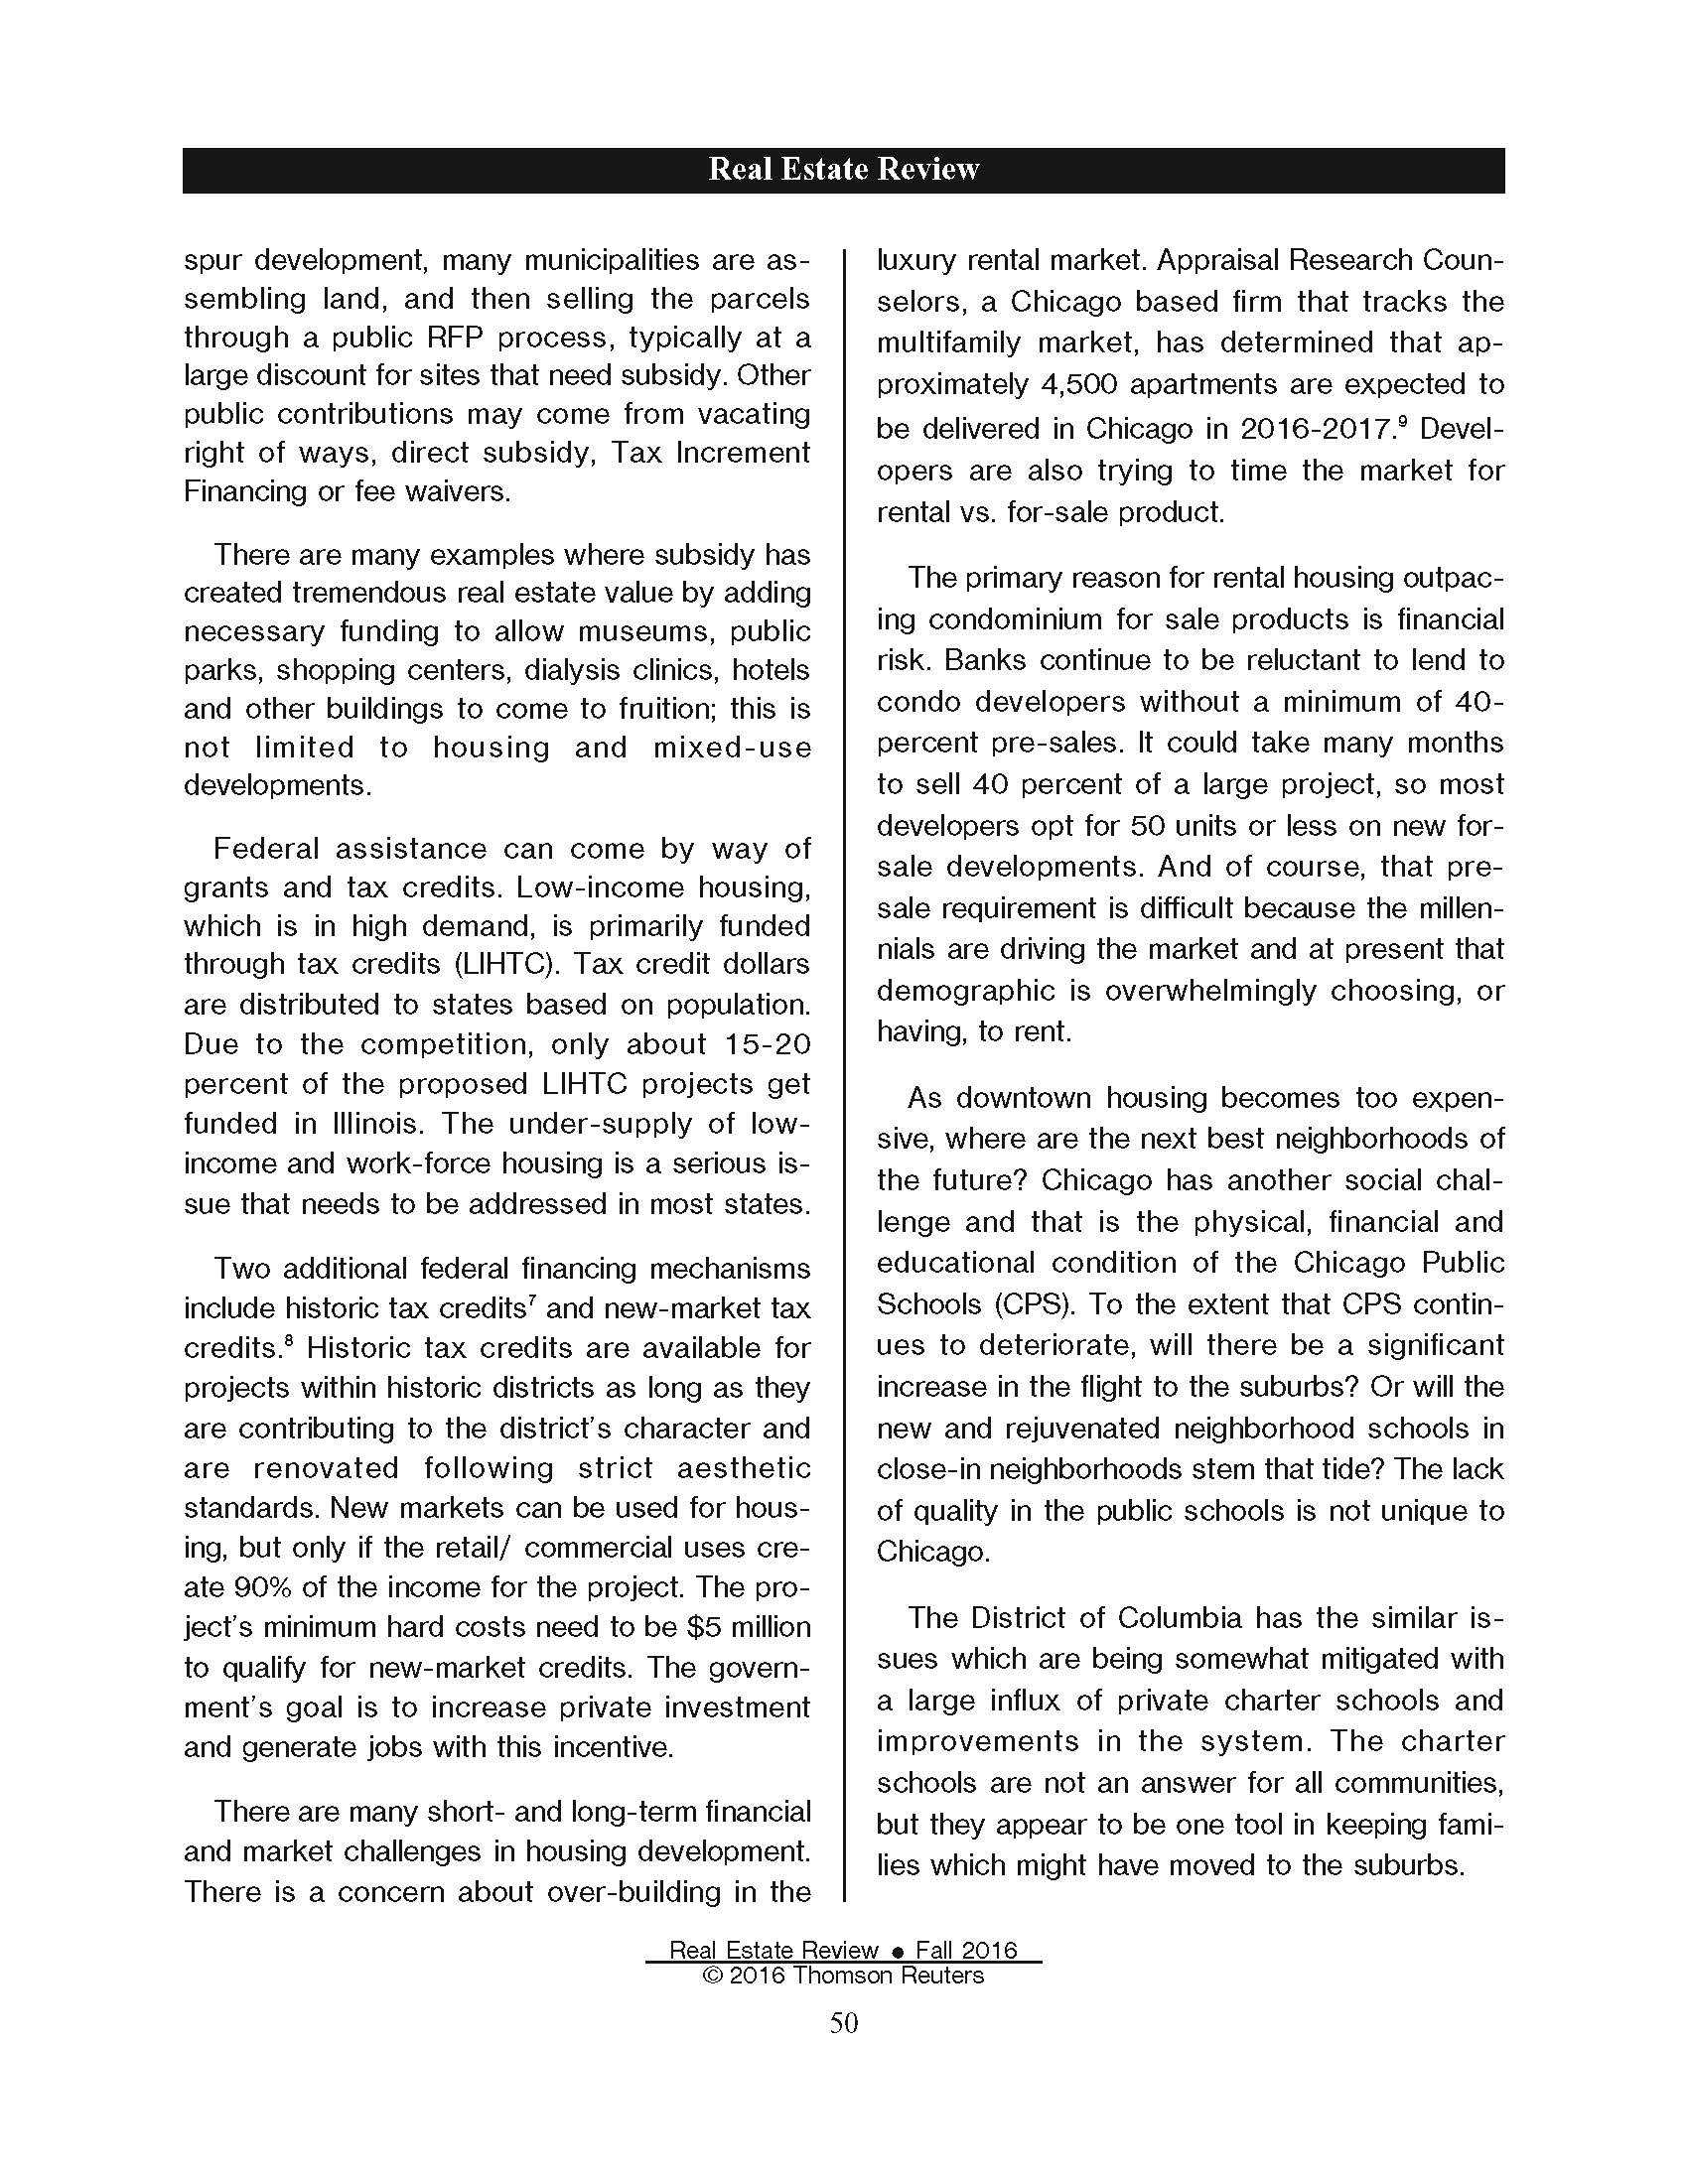 Real Estate Review (Building Mixed-Use Developments Process and Progress in Urban Design) 0916_Page_16